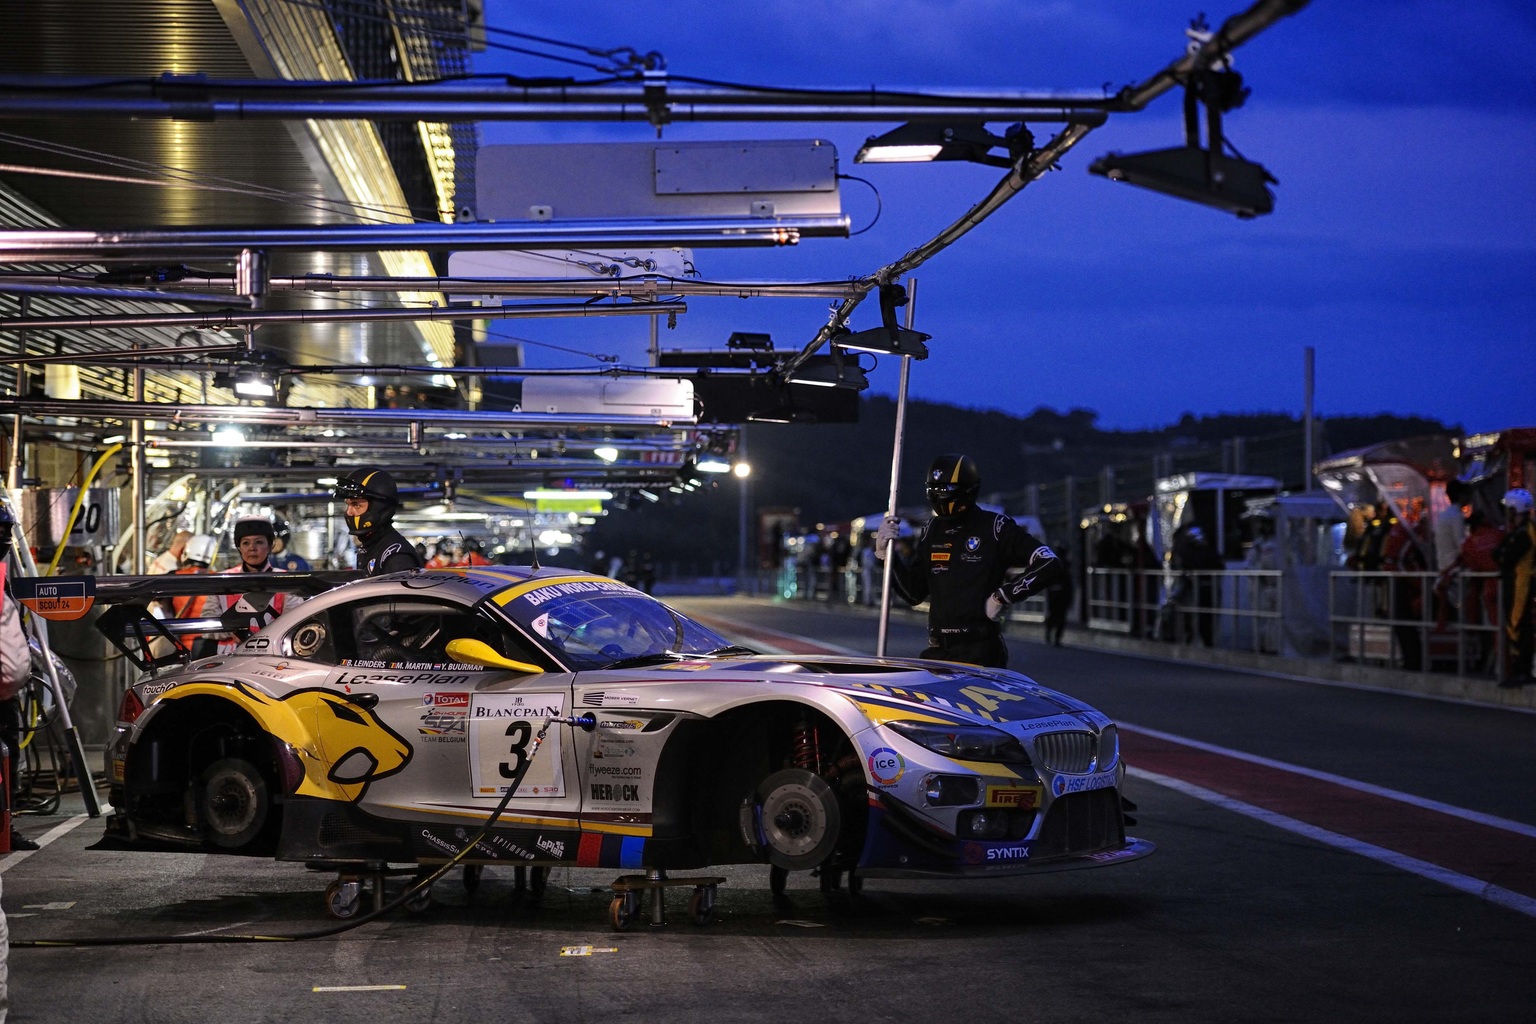 2013 Total 24 Hours of SPA